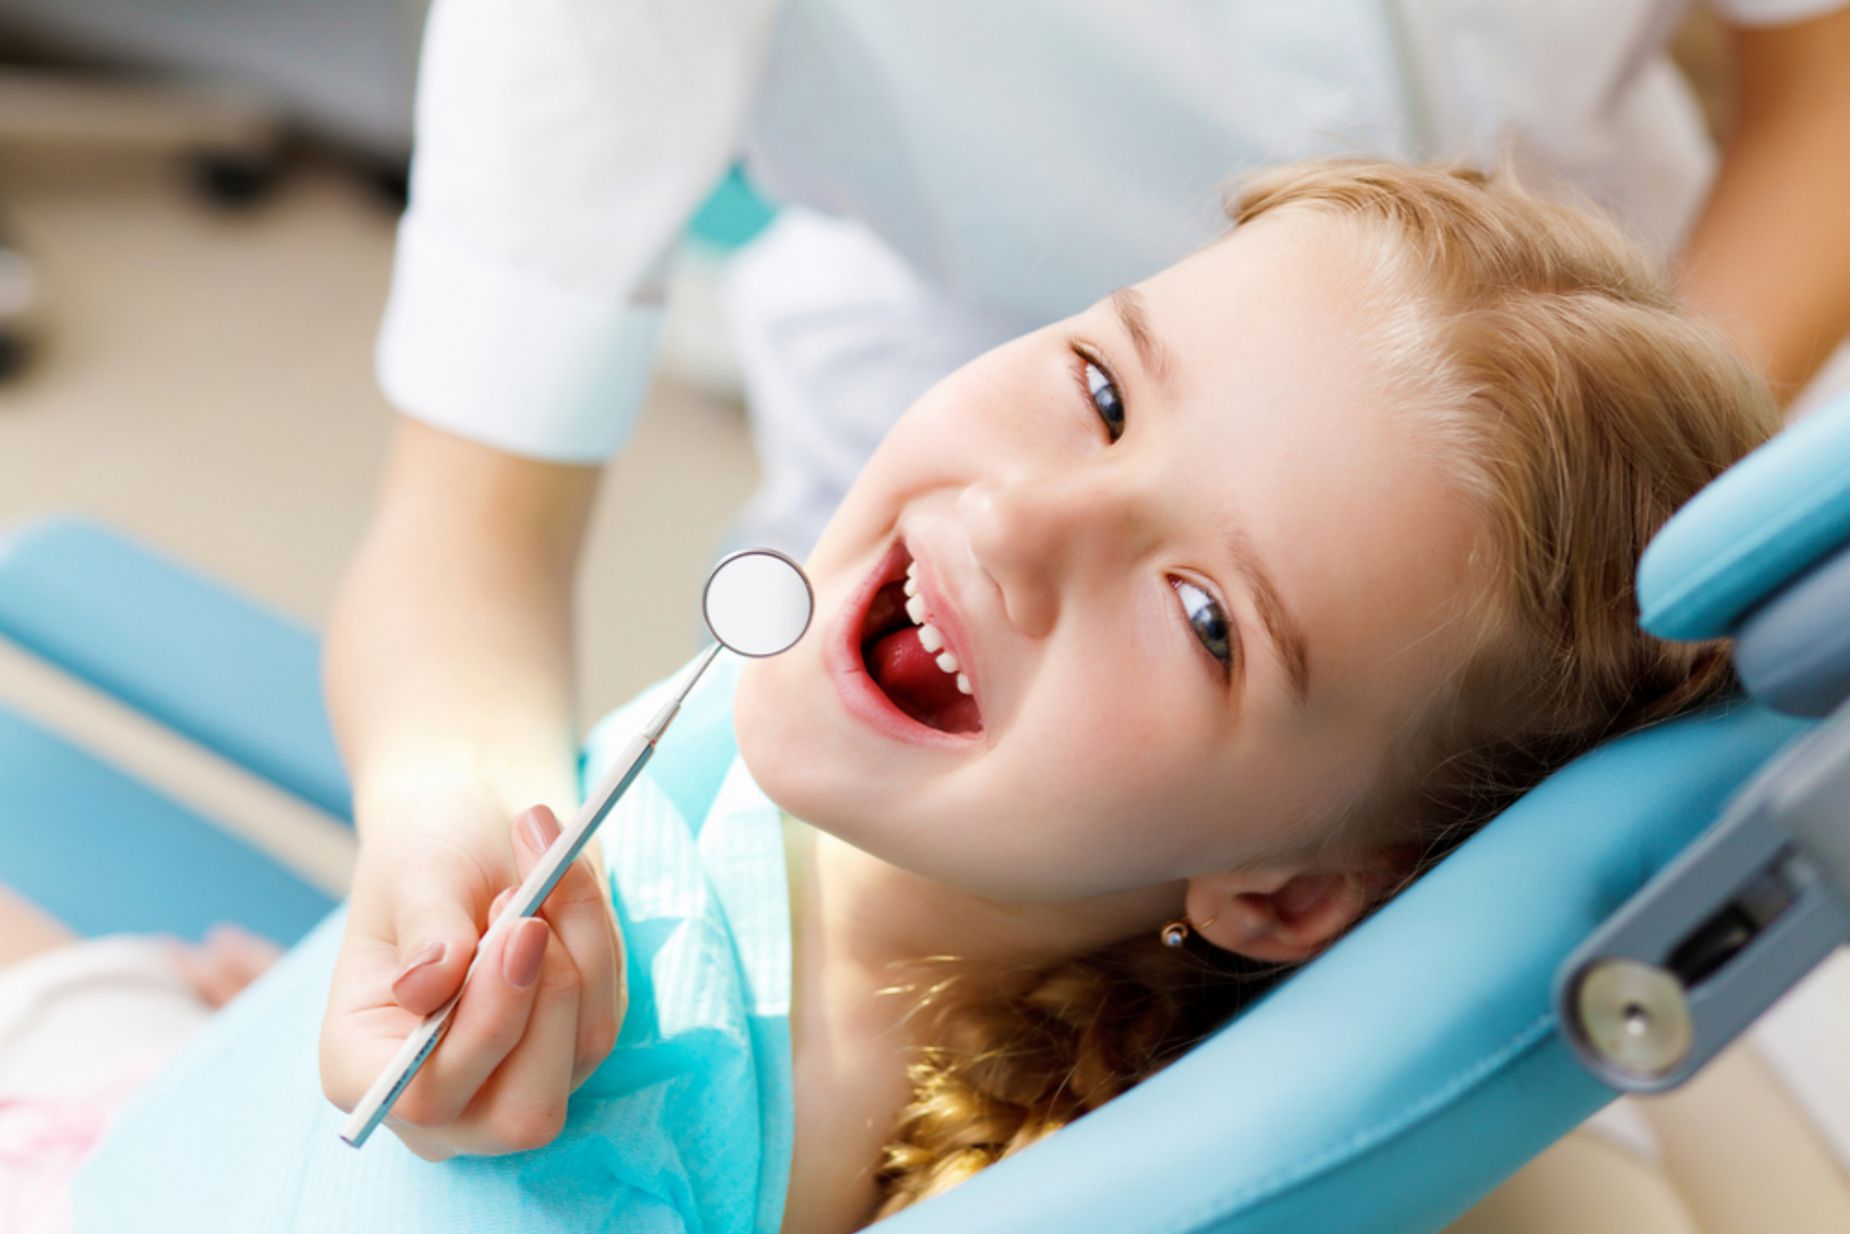 Top 5 Tips to Prepare Kids for Their First Visit to the Dentist